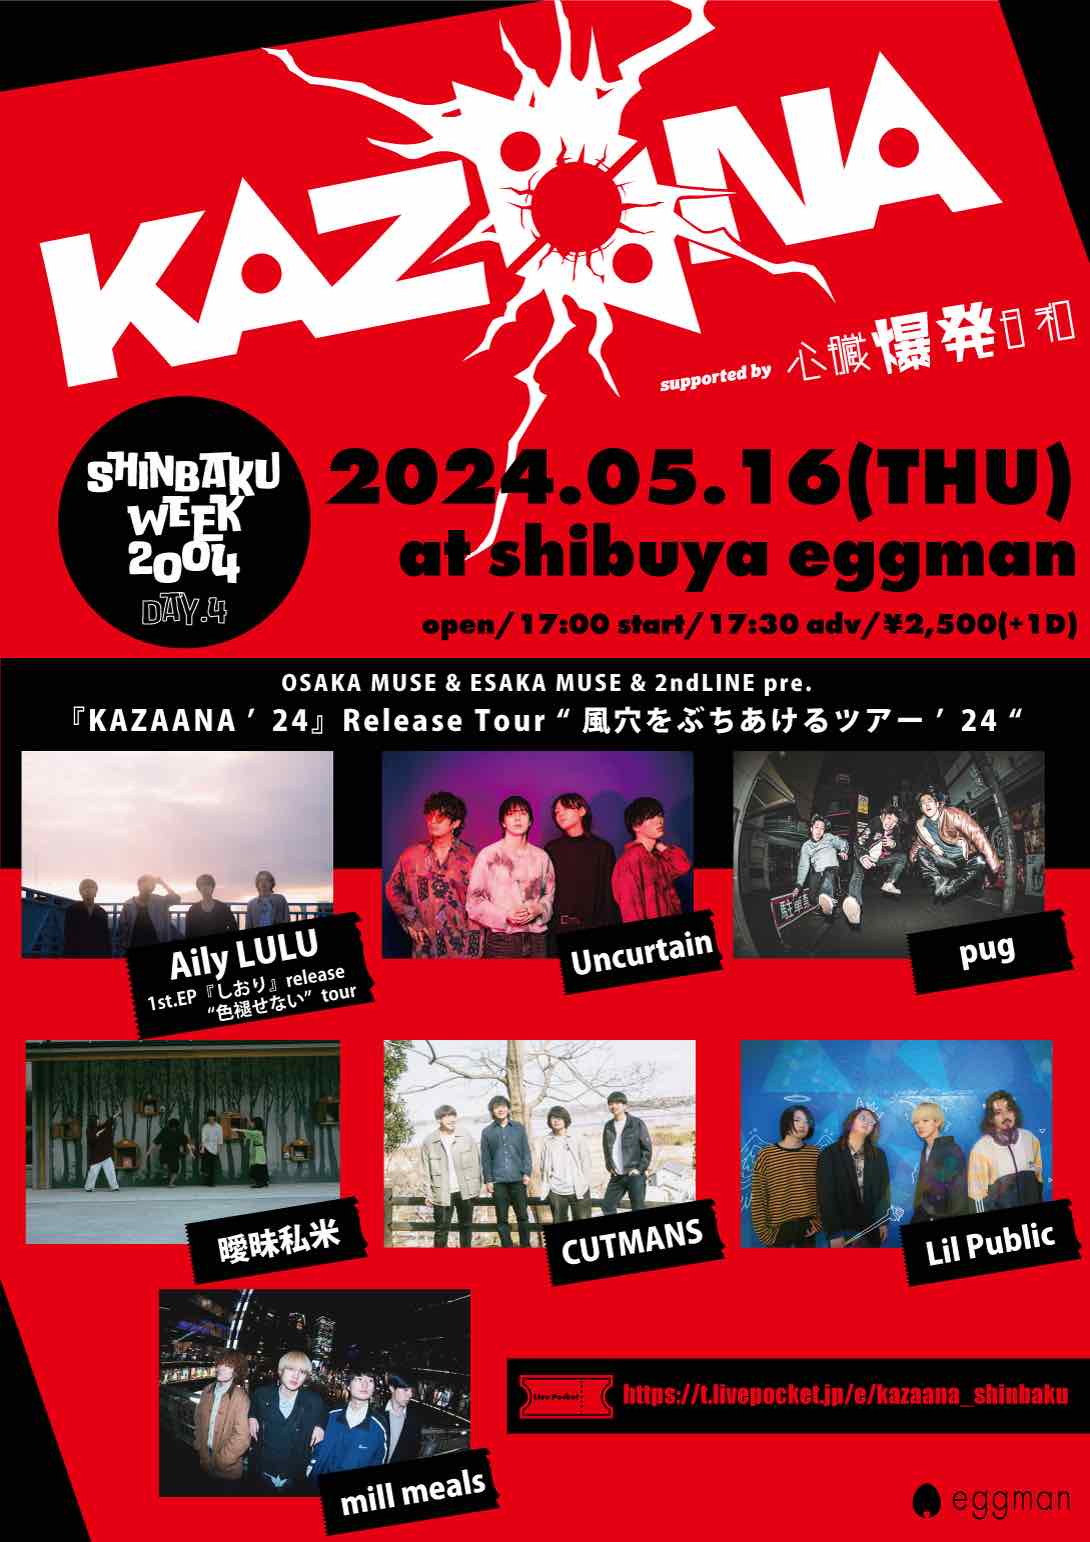 『KAZAANA ’24』Release Tour “ 風穴をぶちあけるツアー ’24 “ × Aily LULU 1st.EP『しおり』release “色褪せない”tour supported by 心臓爆発日和 [SHINBAKU WEEK 2024 DAY.4]